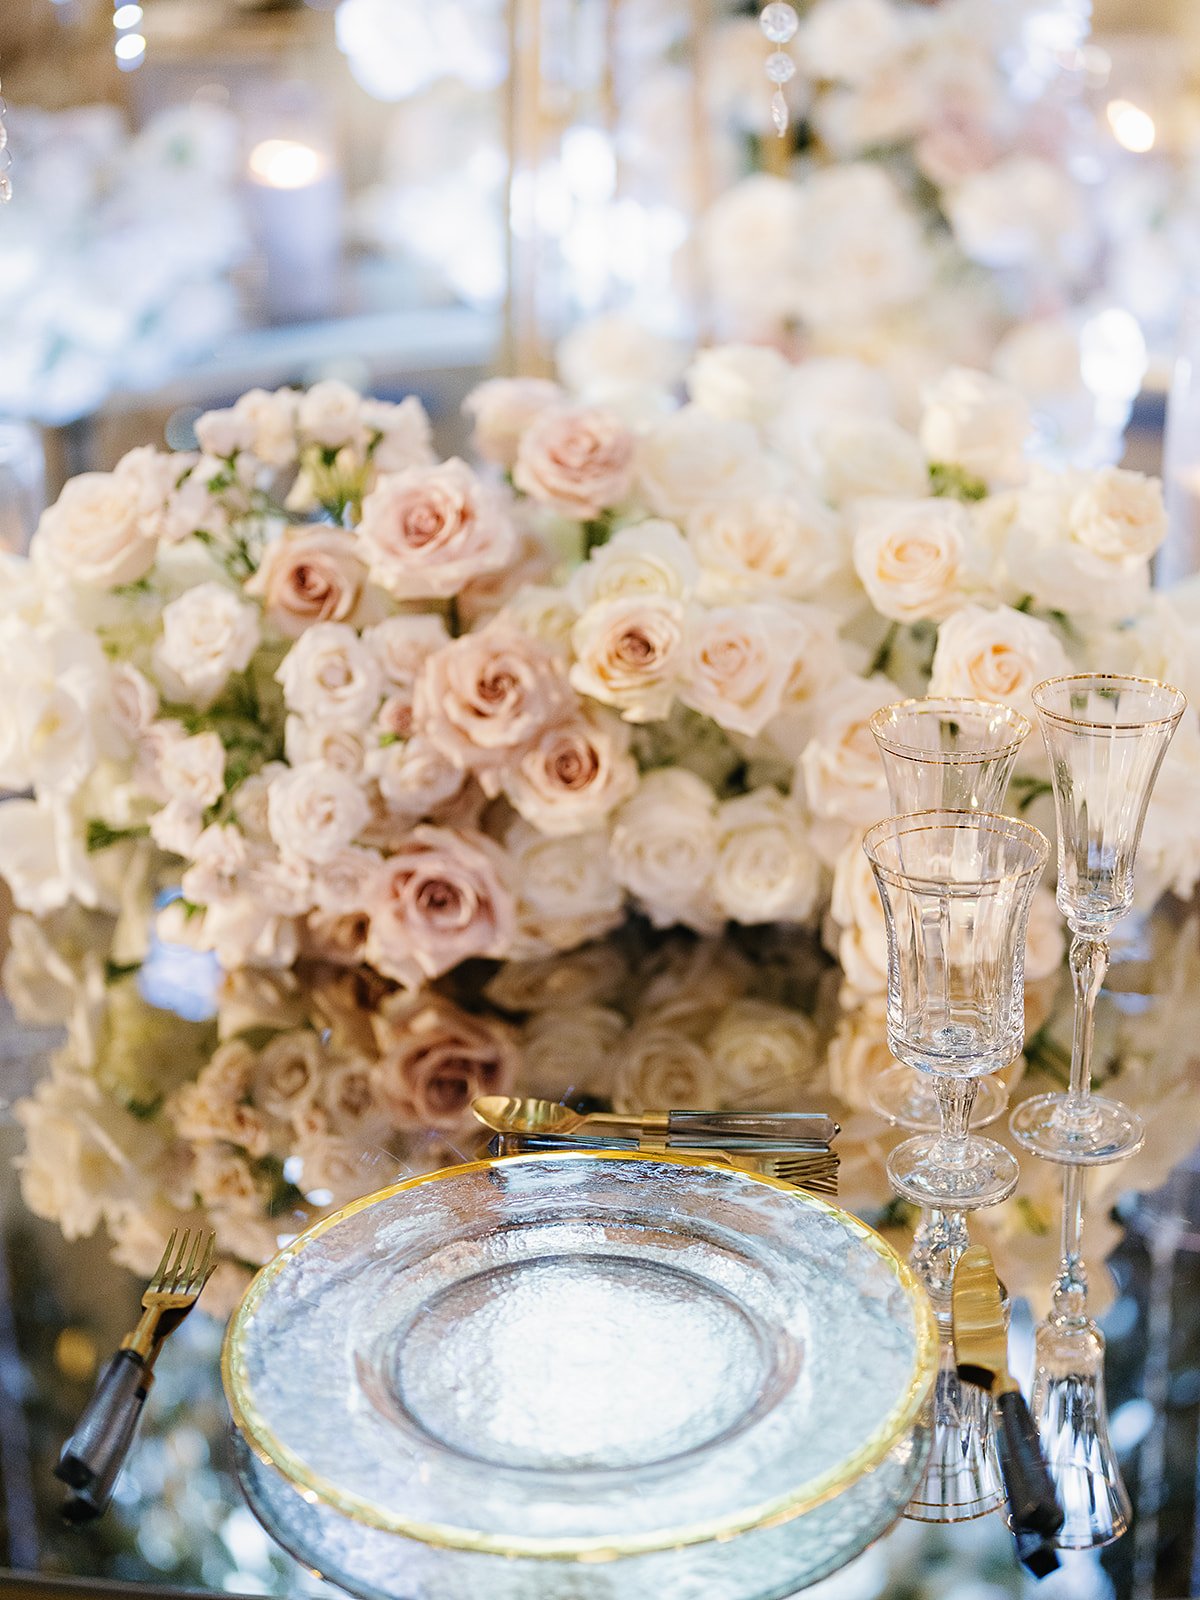 Luxury fairytale placesettings for a wedding